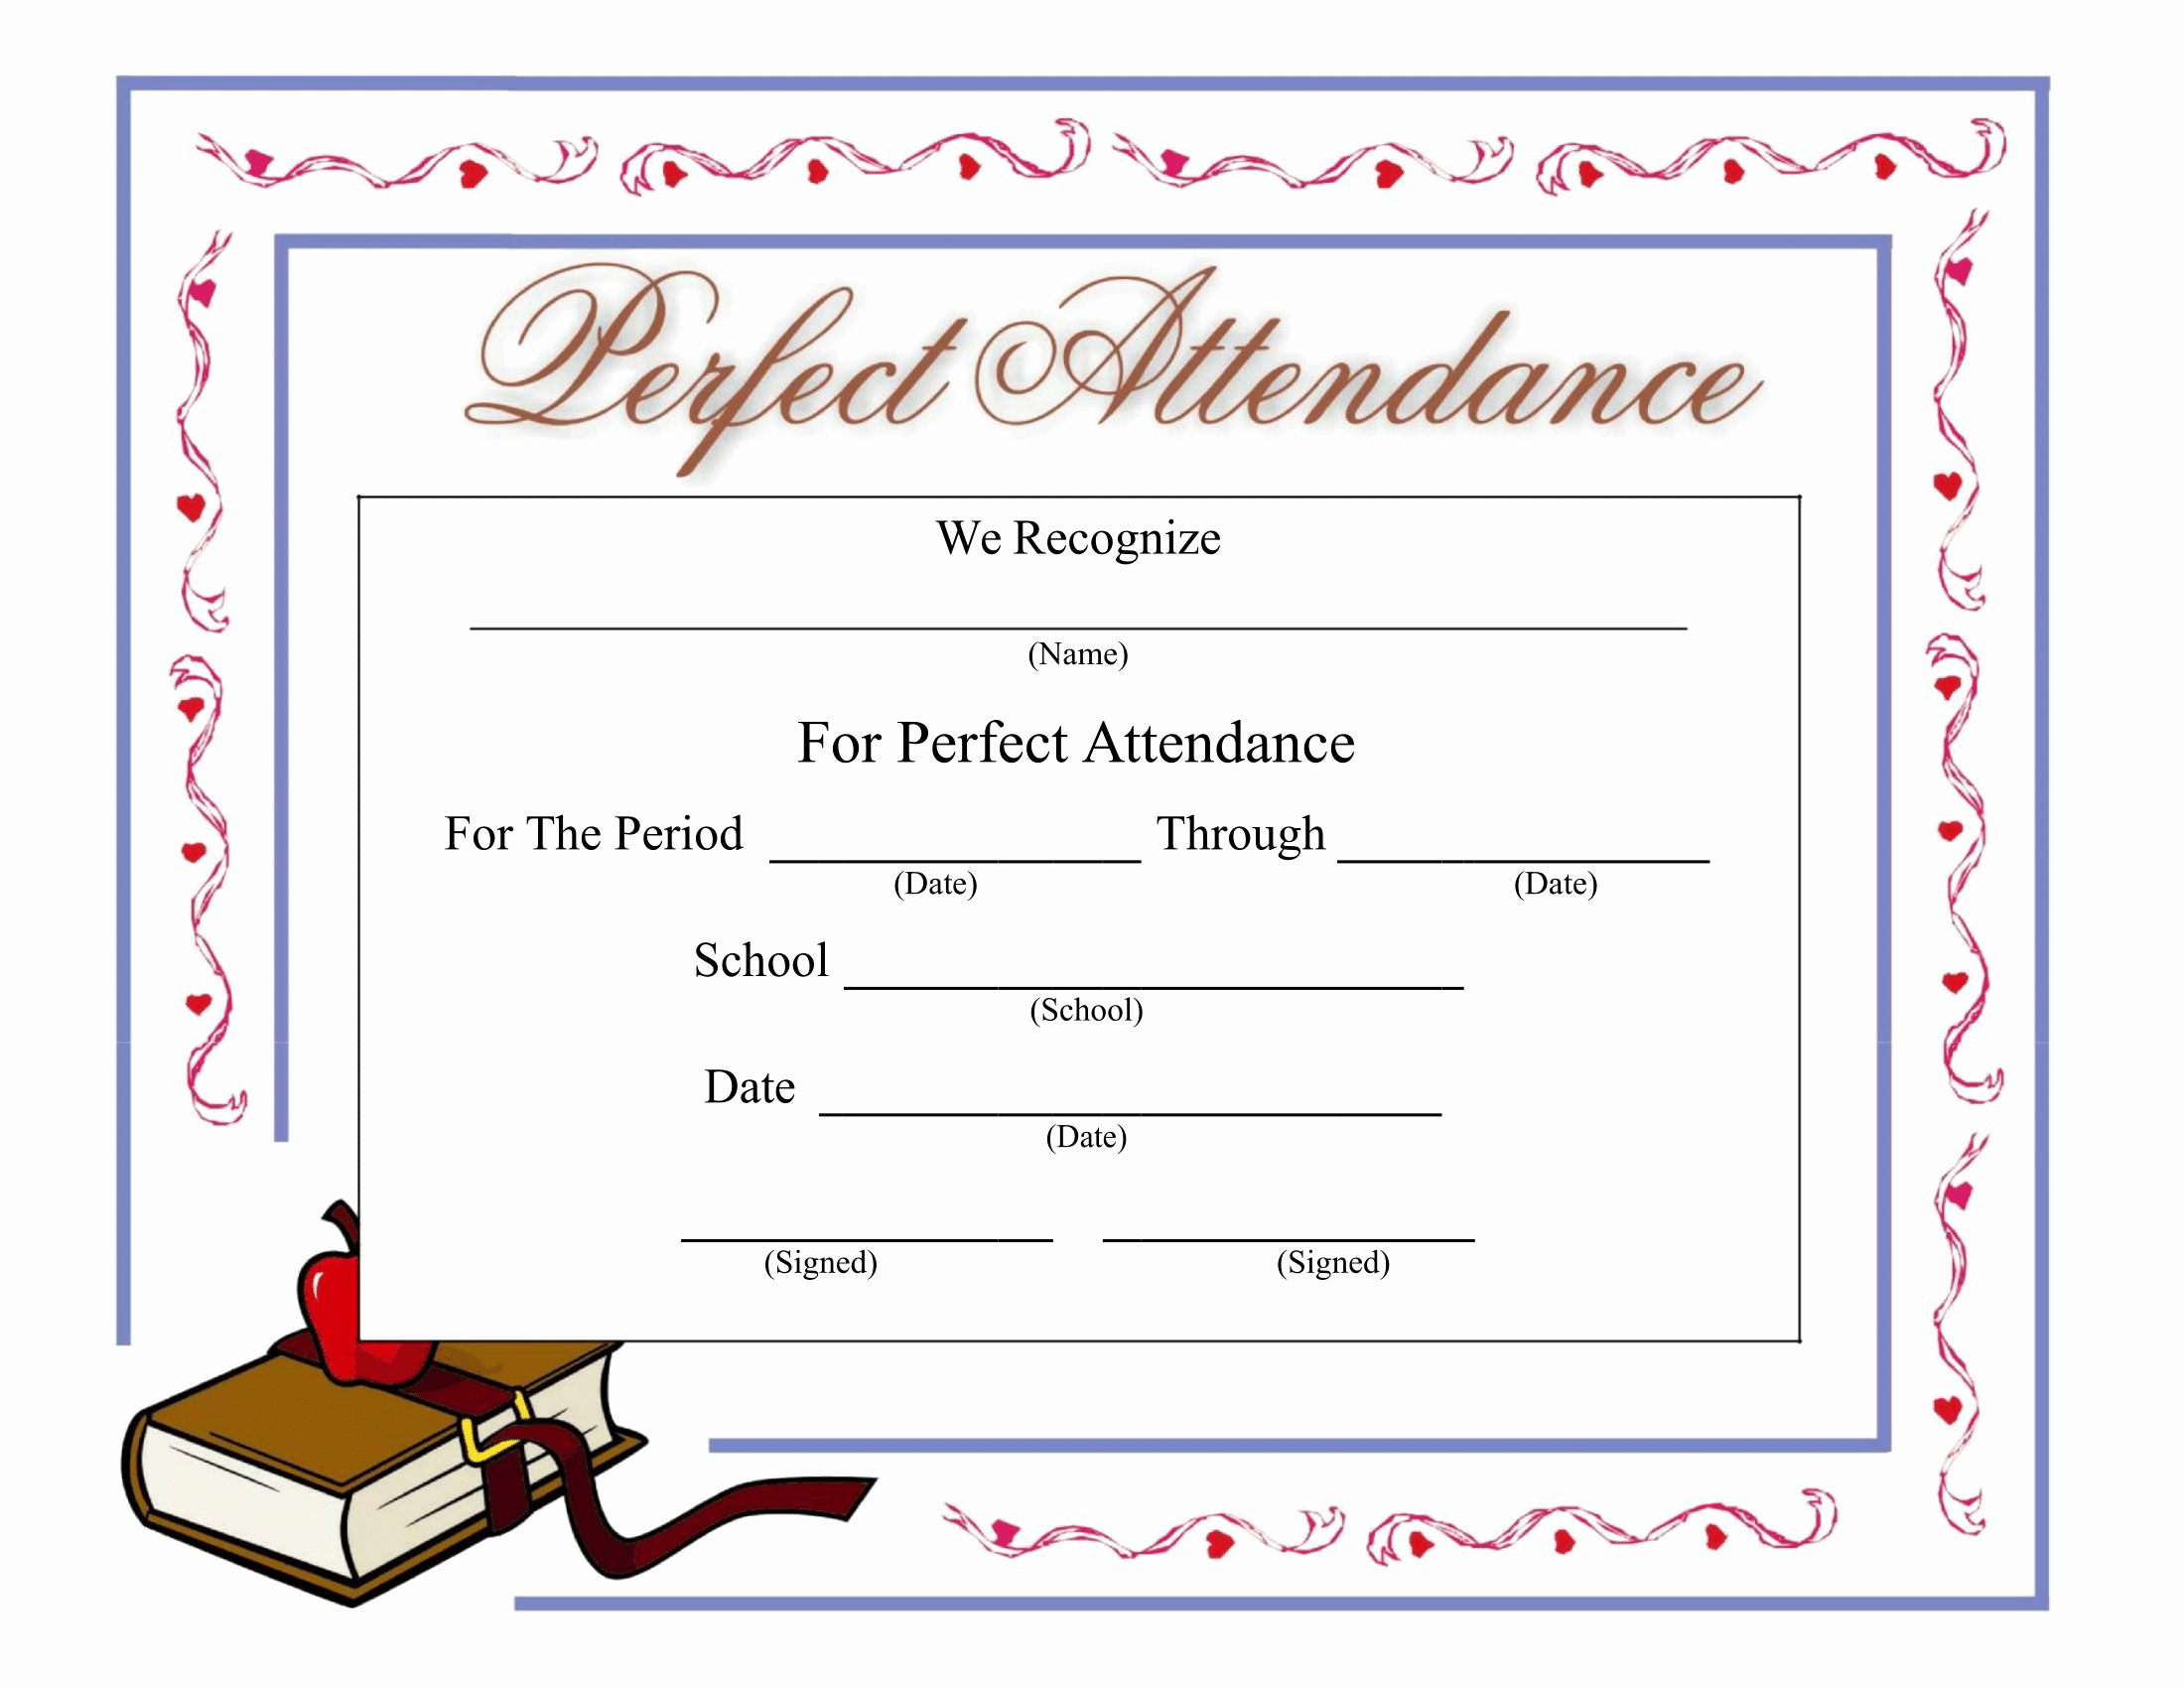 Perfect attendance Certificate Editable Inspirational Certificates Download Free Business Letter Templates